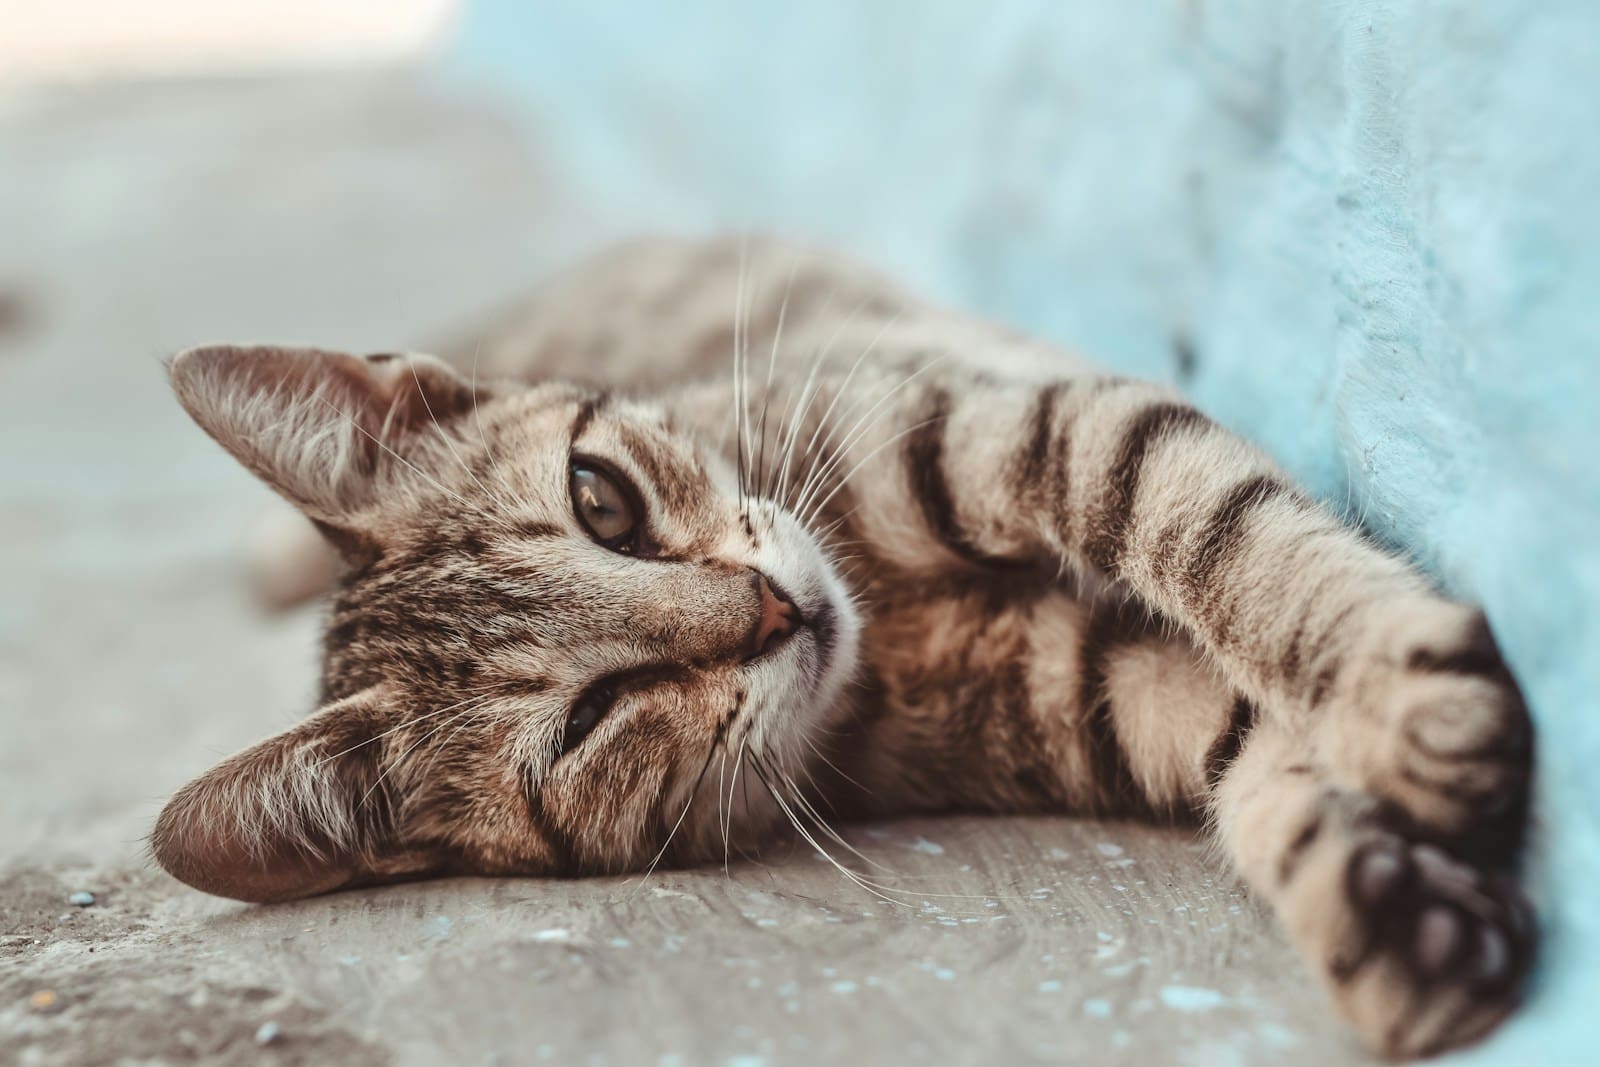 <p>Taking in a stray cat requires more care and patience than adopting a kitten, but can result in a loving, lifelong companion if handled correctly. Doing these 10 things when bringing in a stray can make all the difference.</p>